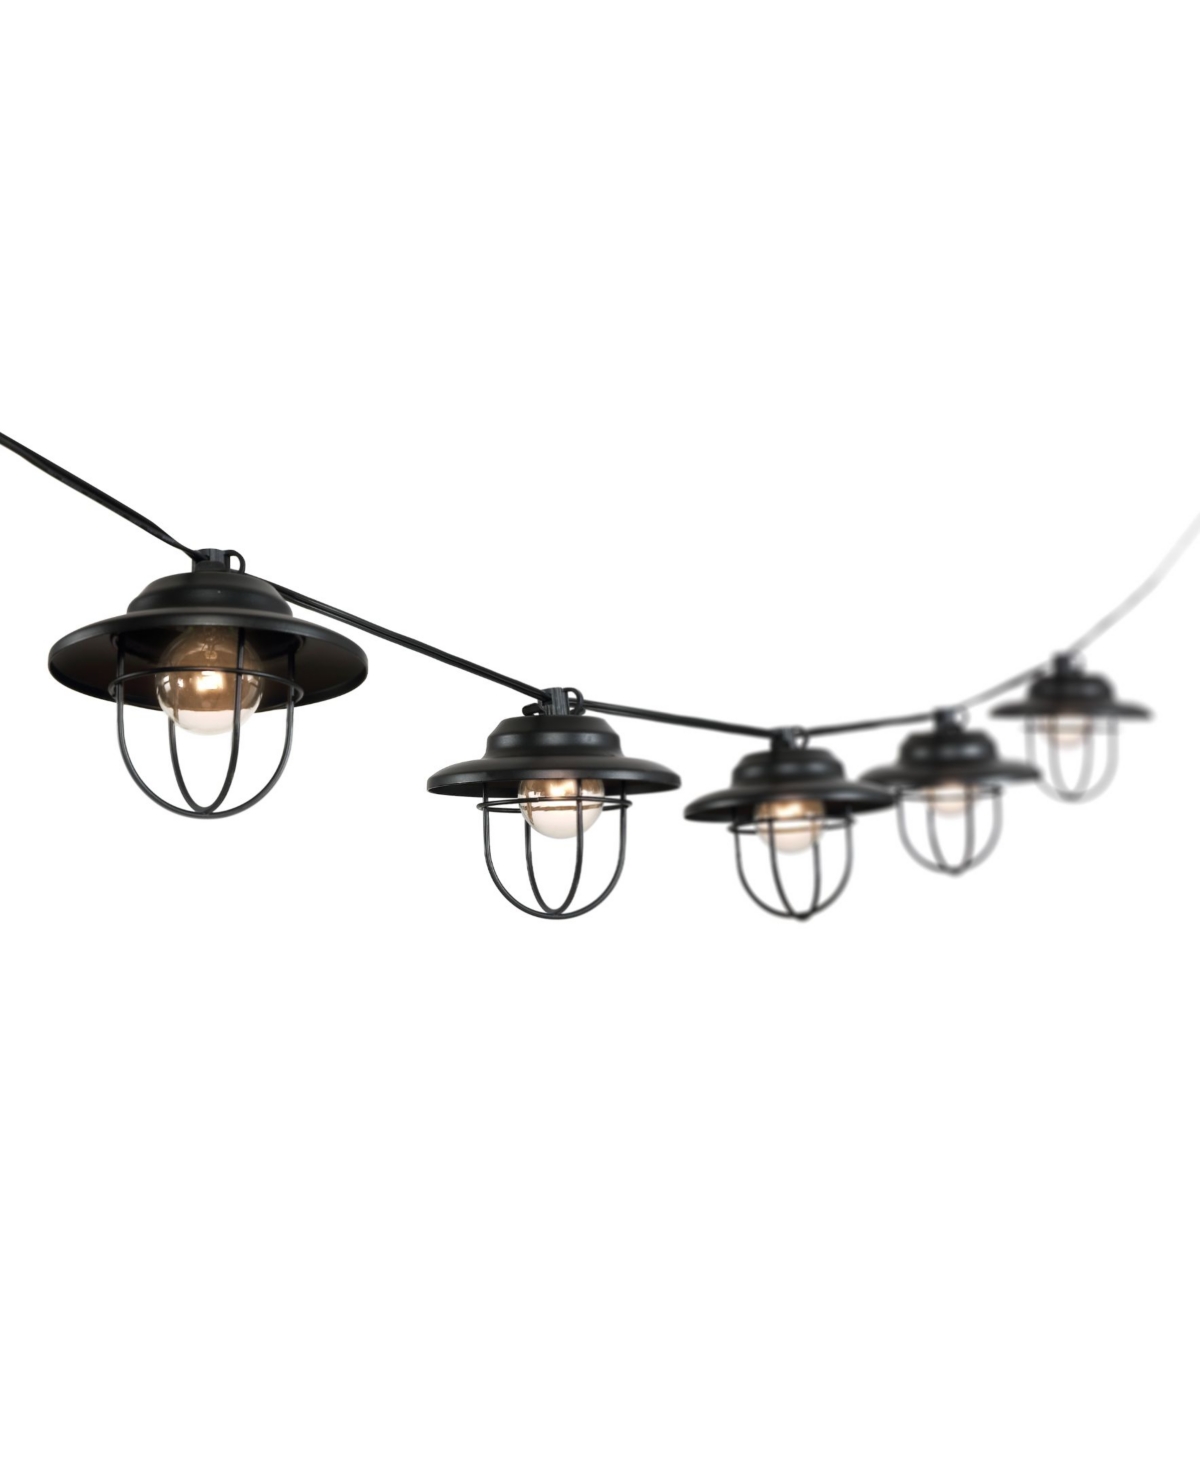 Jonathan Y 10-light Indoor And Outdoor Rustic Farmhouse Incandescent G40 Metal Cage Shade String Lights In Black